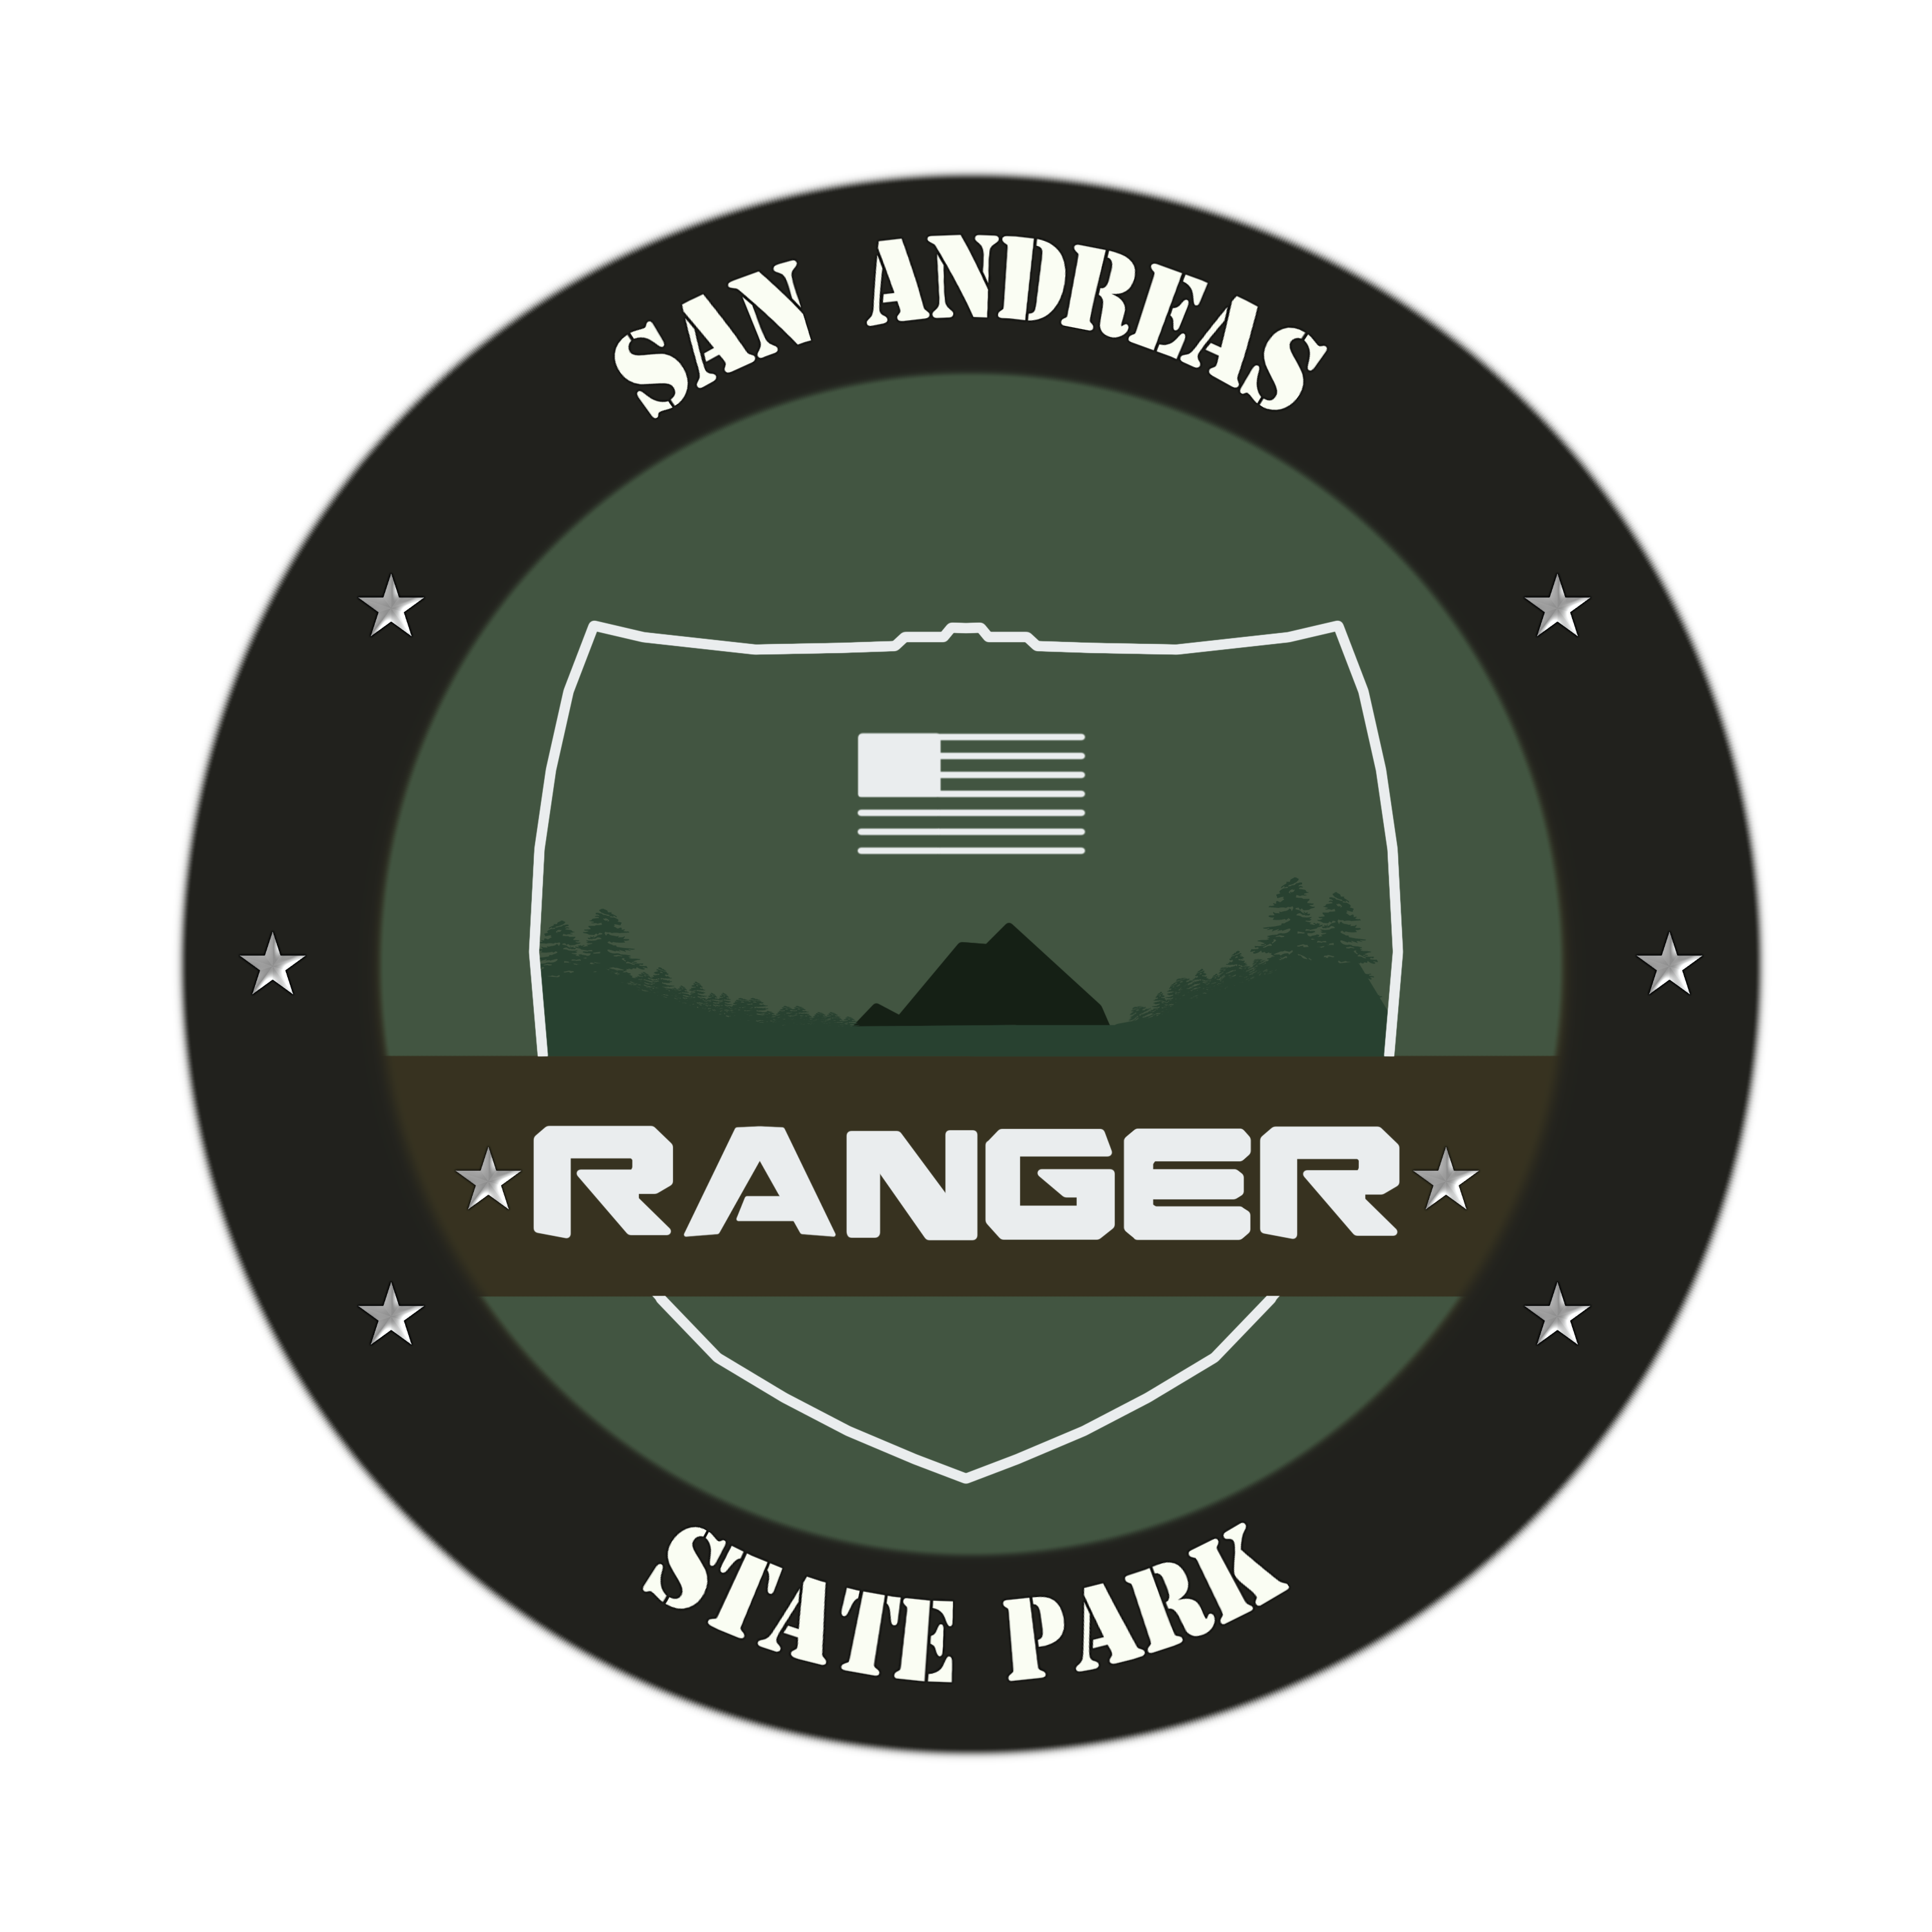 Looking to park ranger/game warden as my career? Any tips or